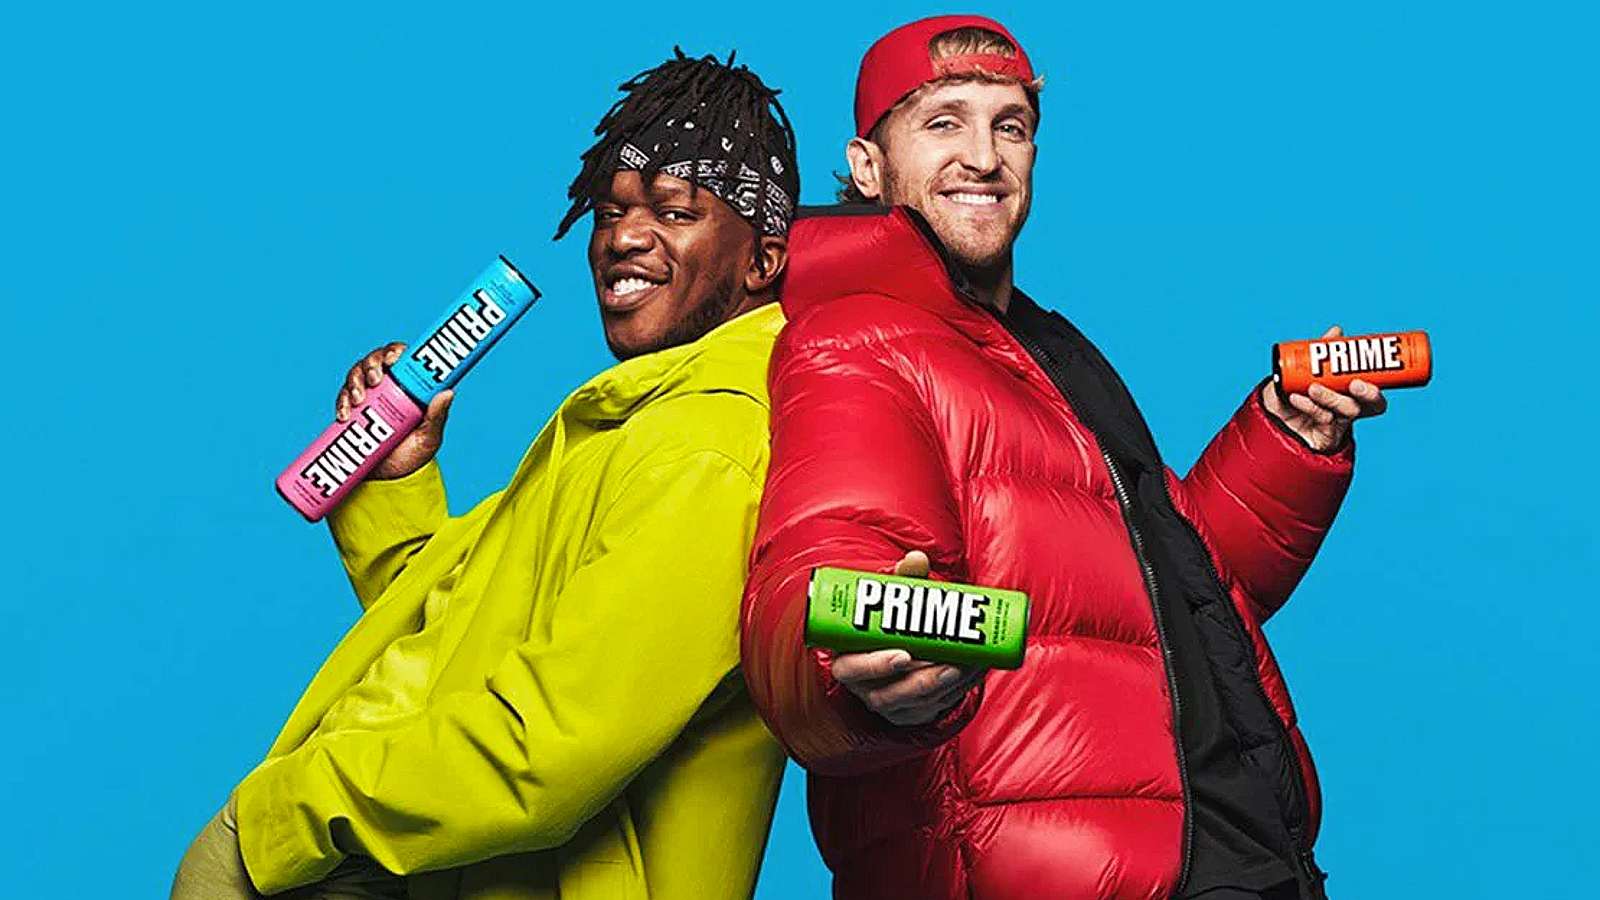 logan paul and ksi with prime bottles for ad